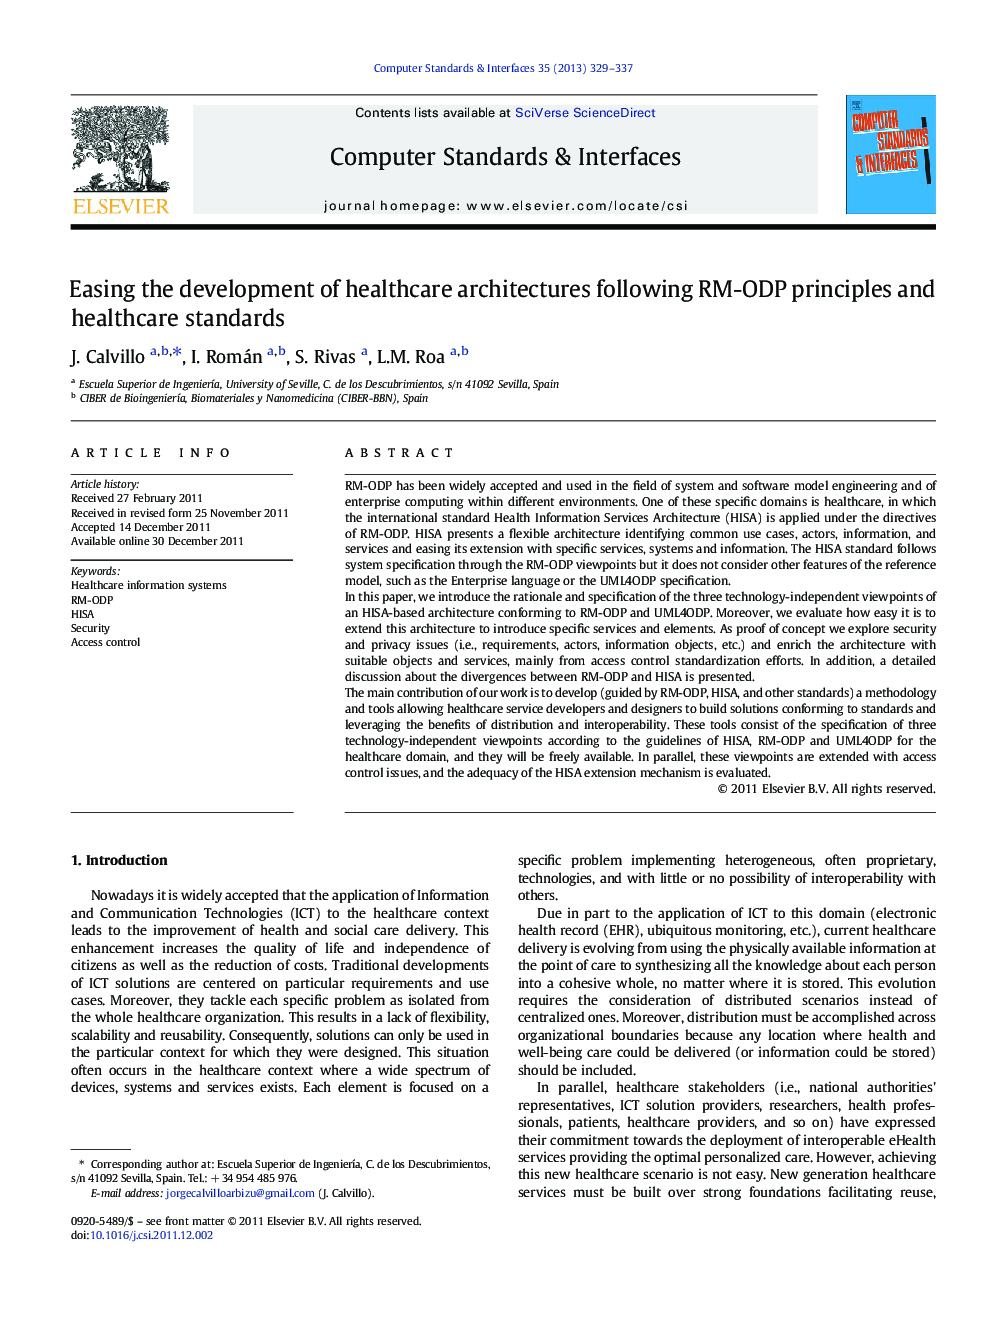 Easing the development of healthcare architectures following RM-ODP principles and healthcare standards